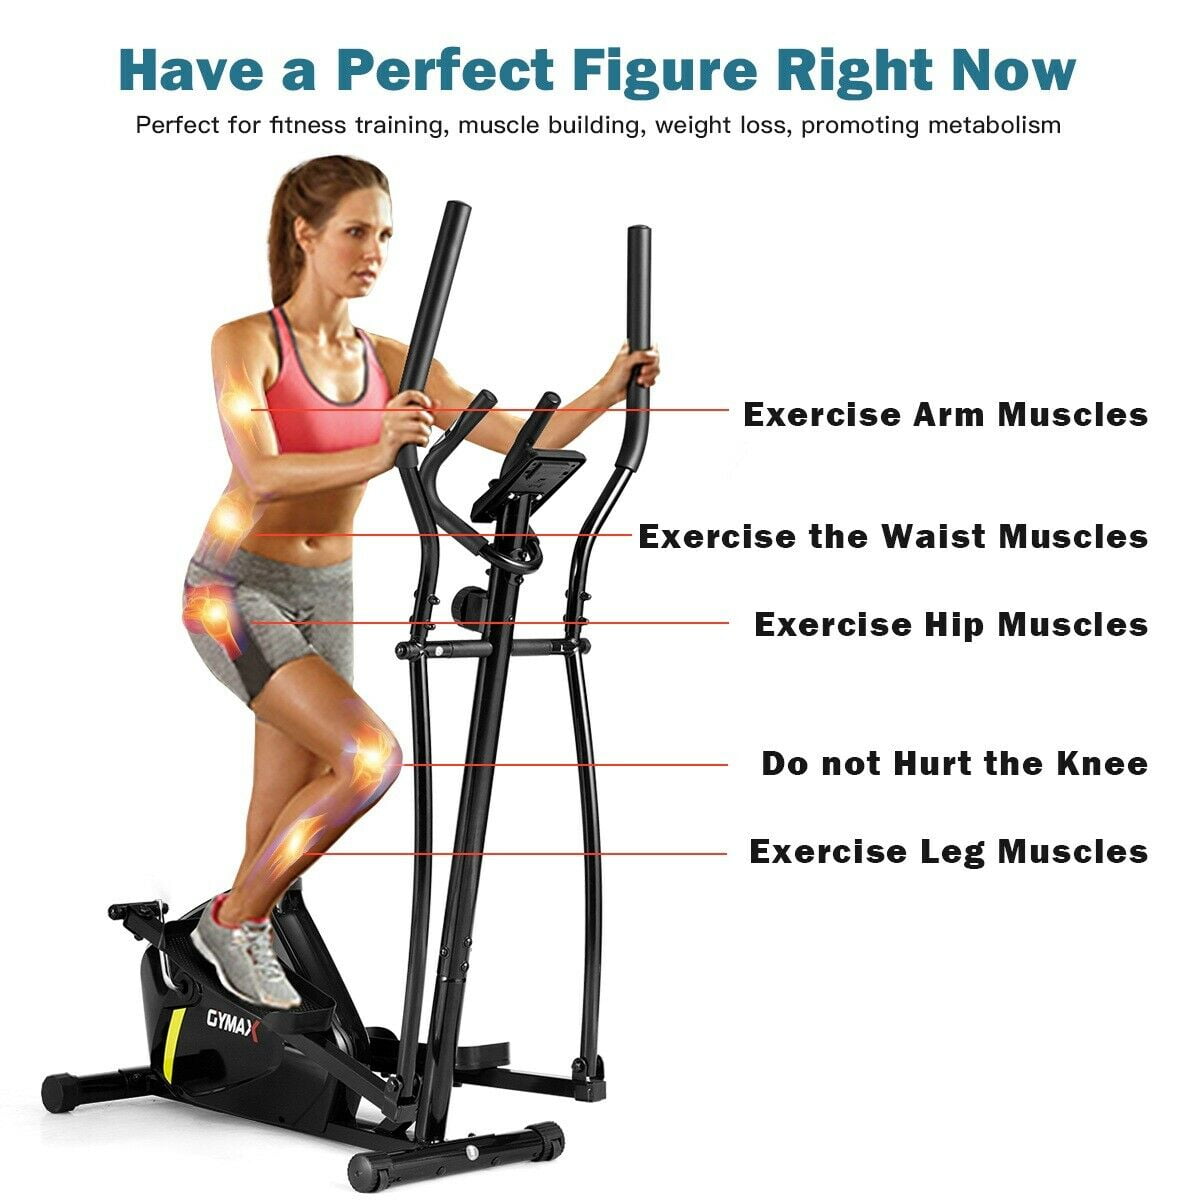 elliptical trainer workouts for weight loss